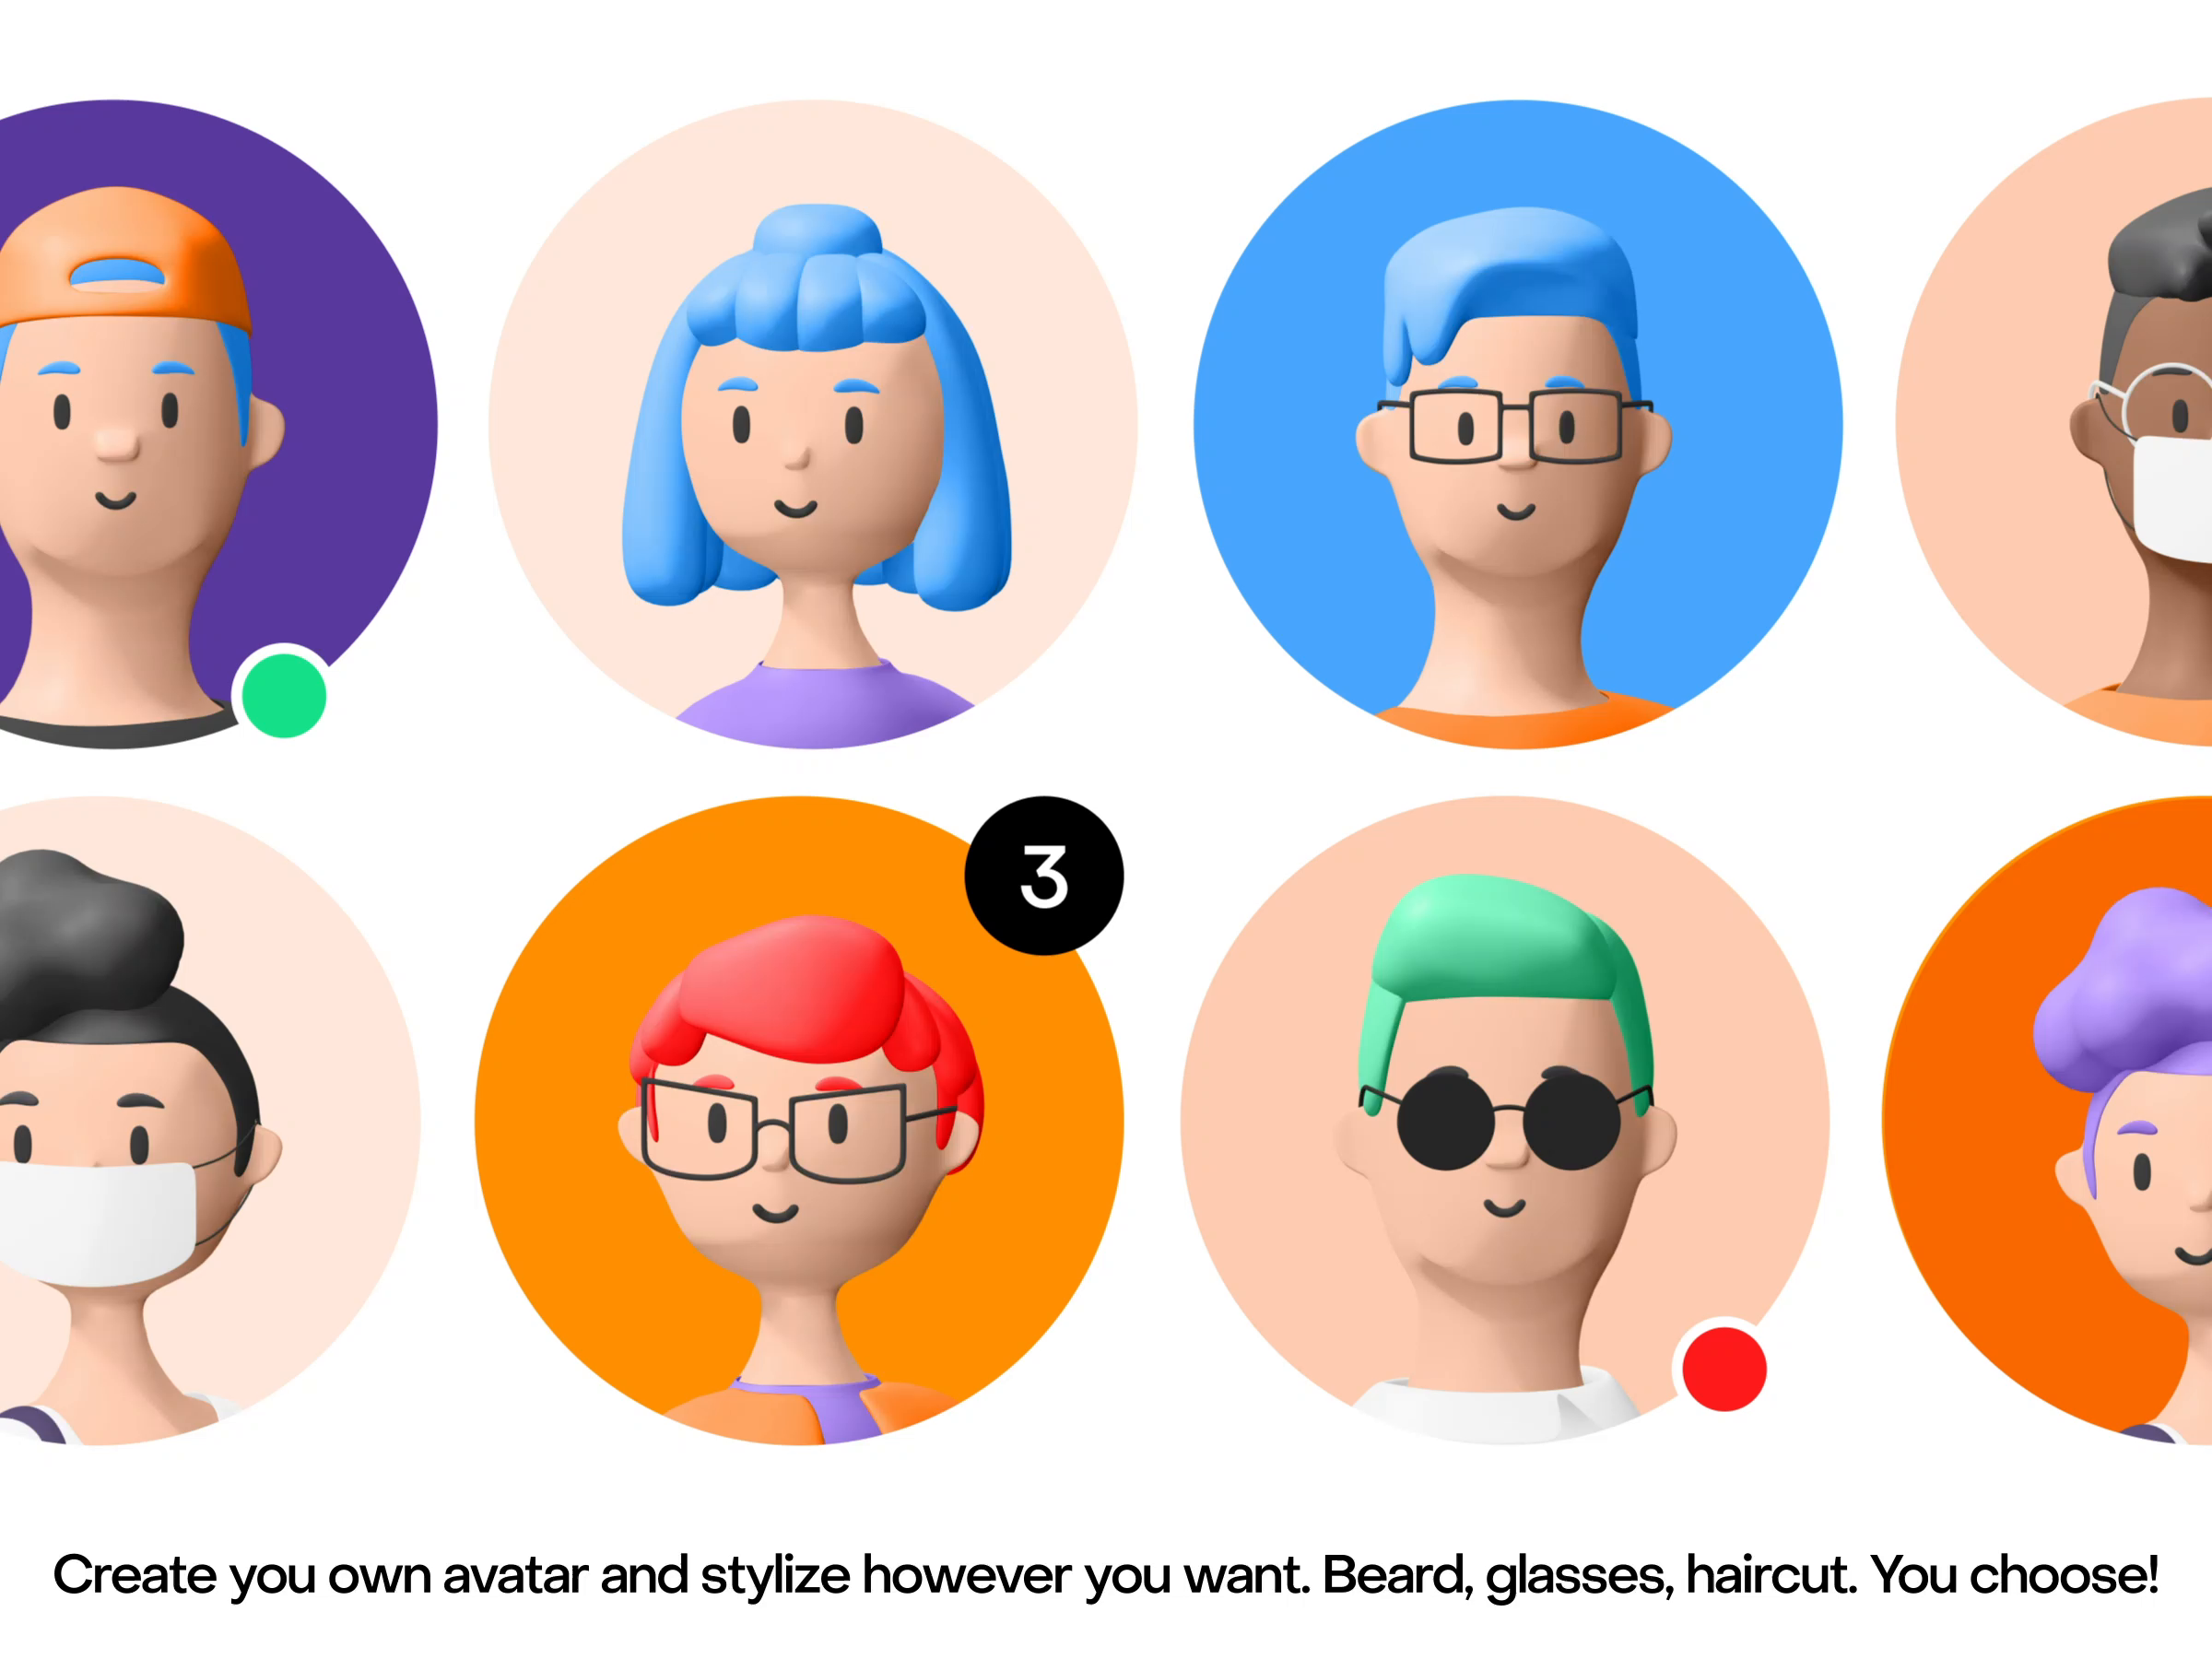 Koreas 3D Avatar Creator App Zepeto is Currently Trending in China   Gizmochina